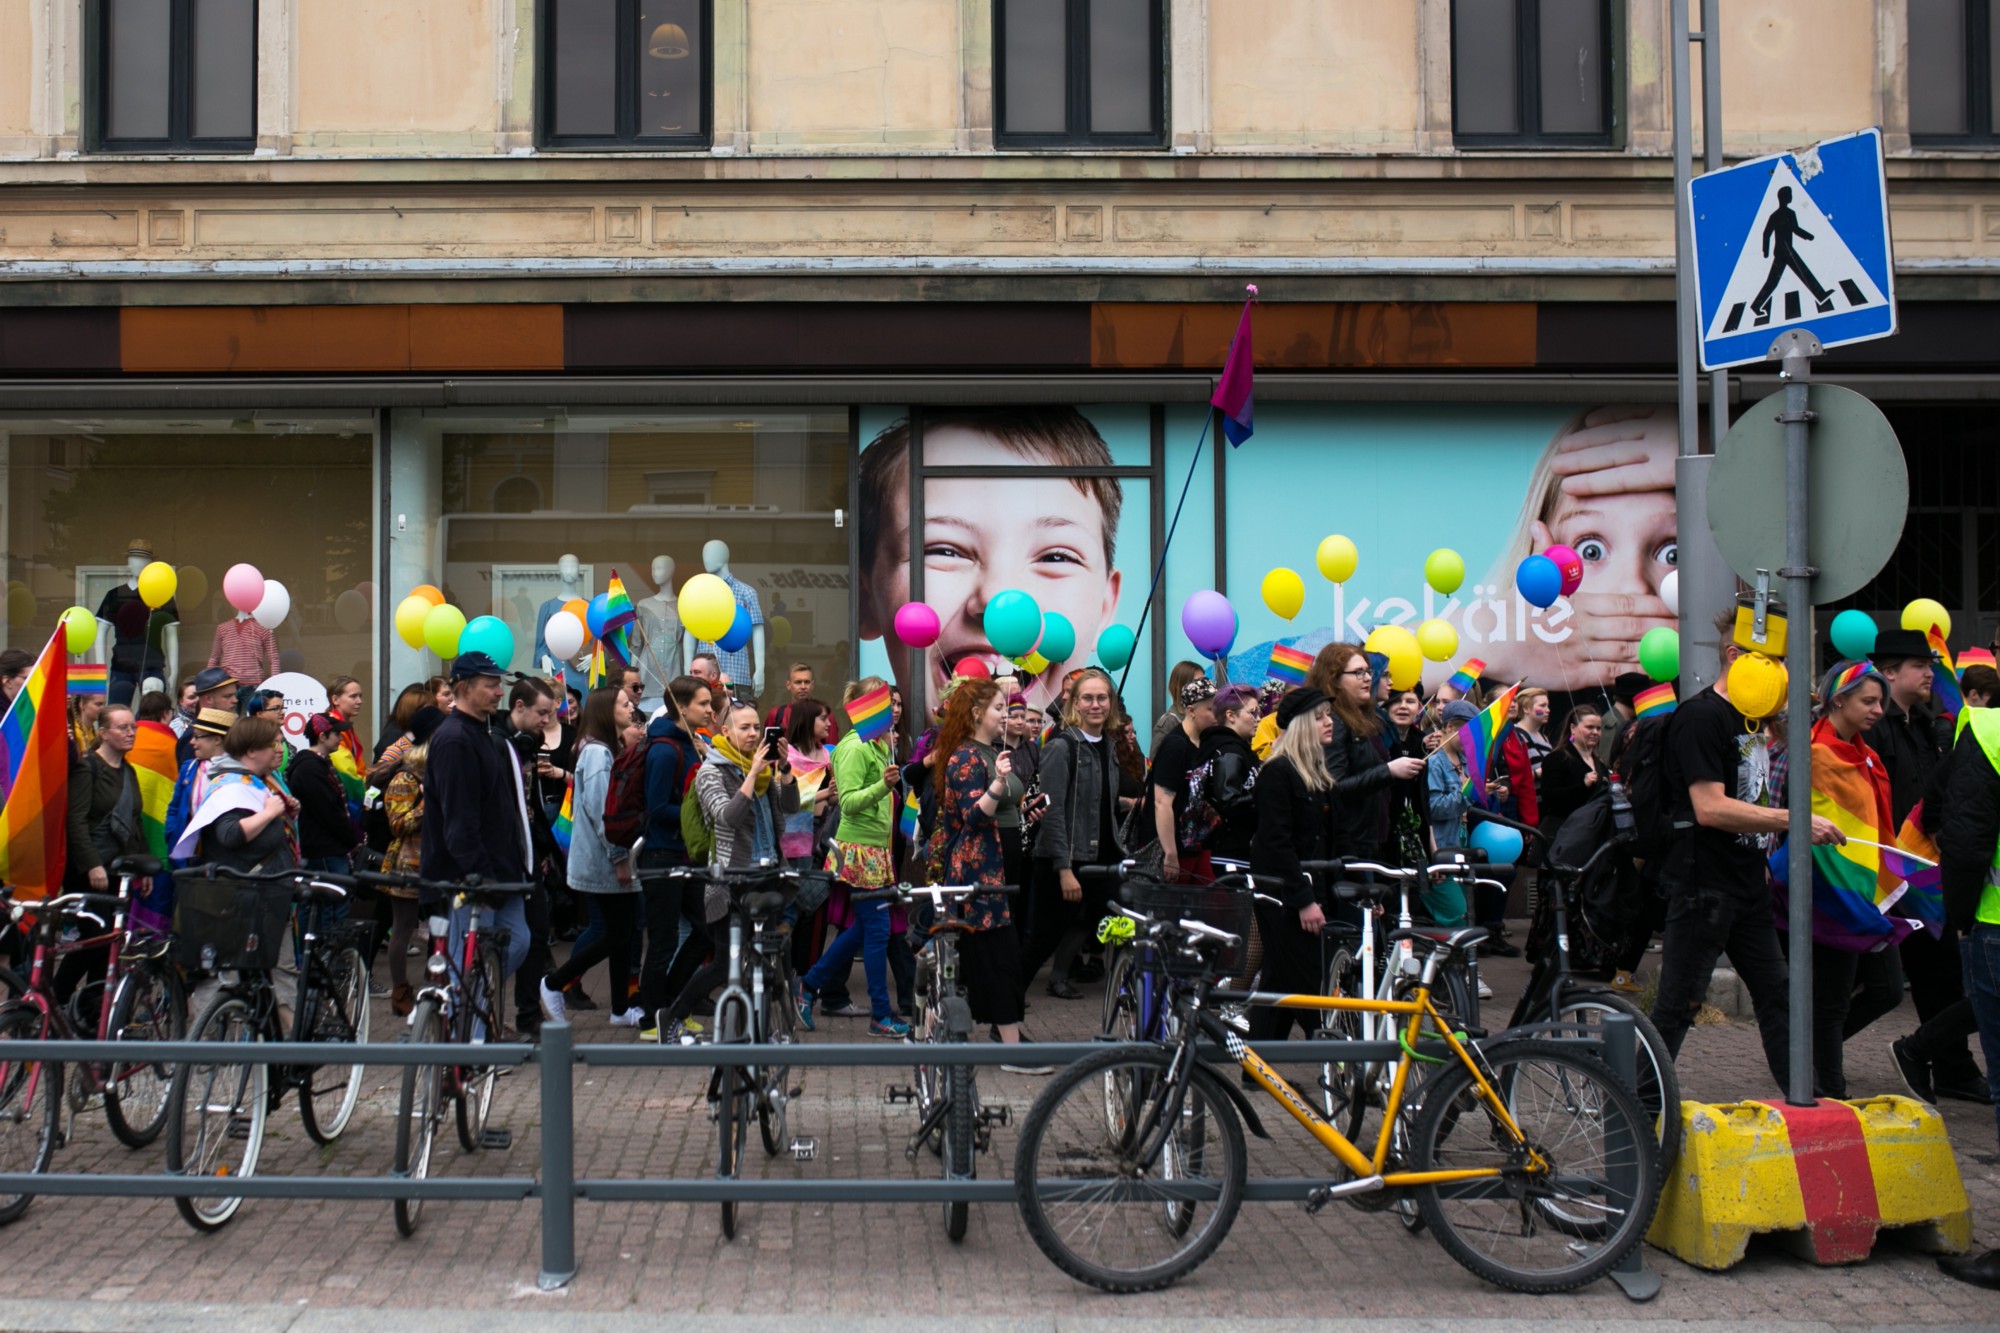 2,000 People Join the Pride Parade in Tampere – View the Pictures